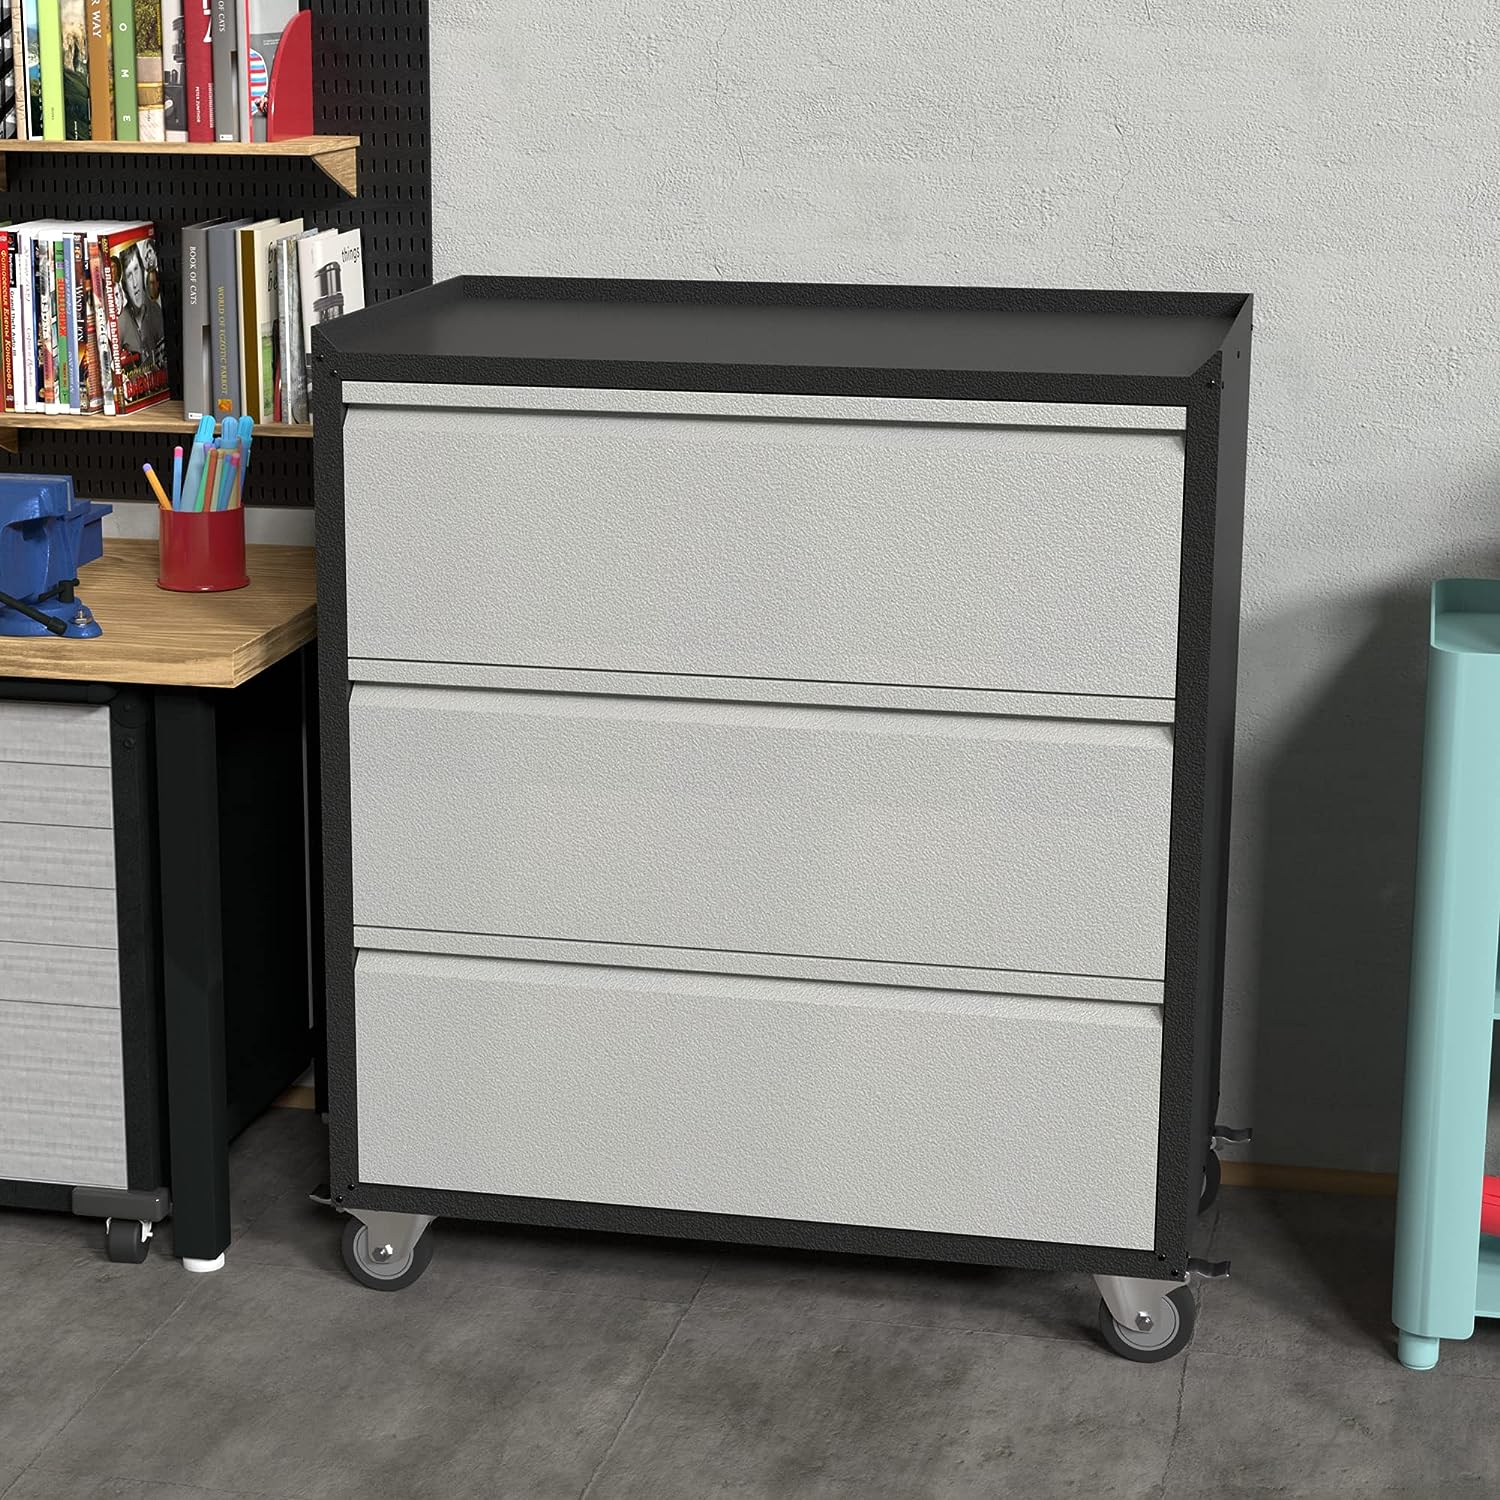 Yizosh Metal Rolling Cabinet with 3 Drawers, Storage Chest for Garage Utility Room, Black/Gray (Assemble Required)